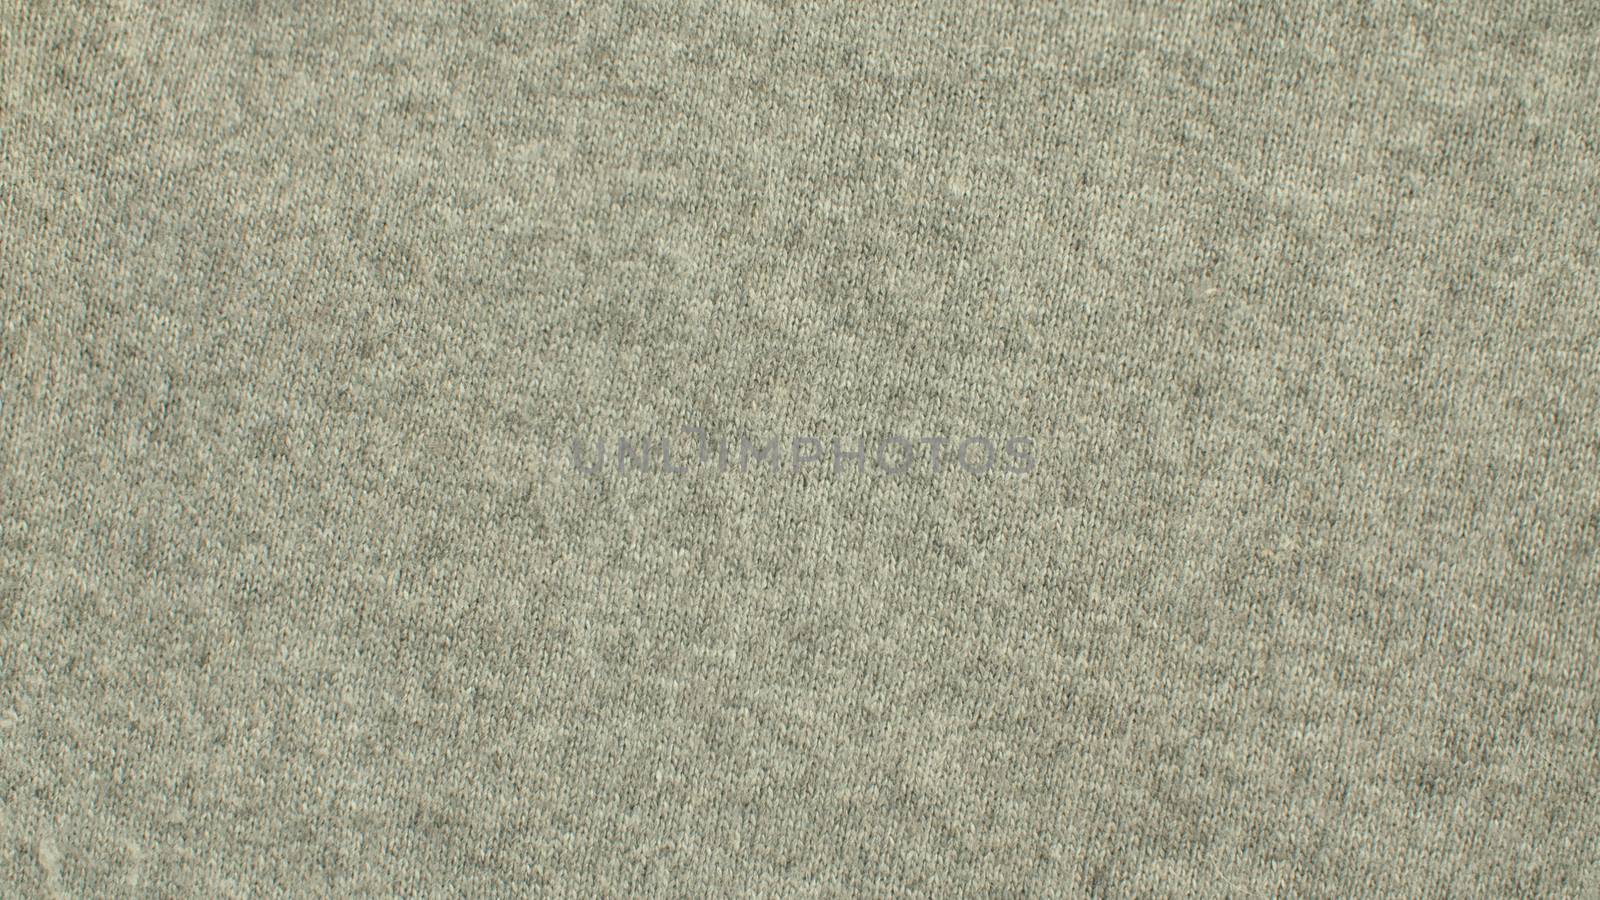 Extreme close up gray wool knitted fabric. Texture, textile background. Macro shooting